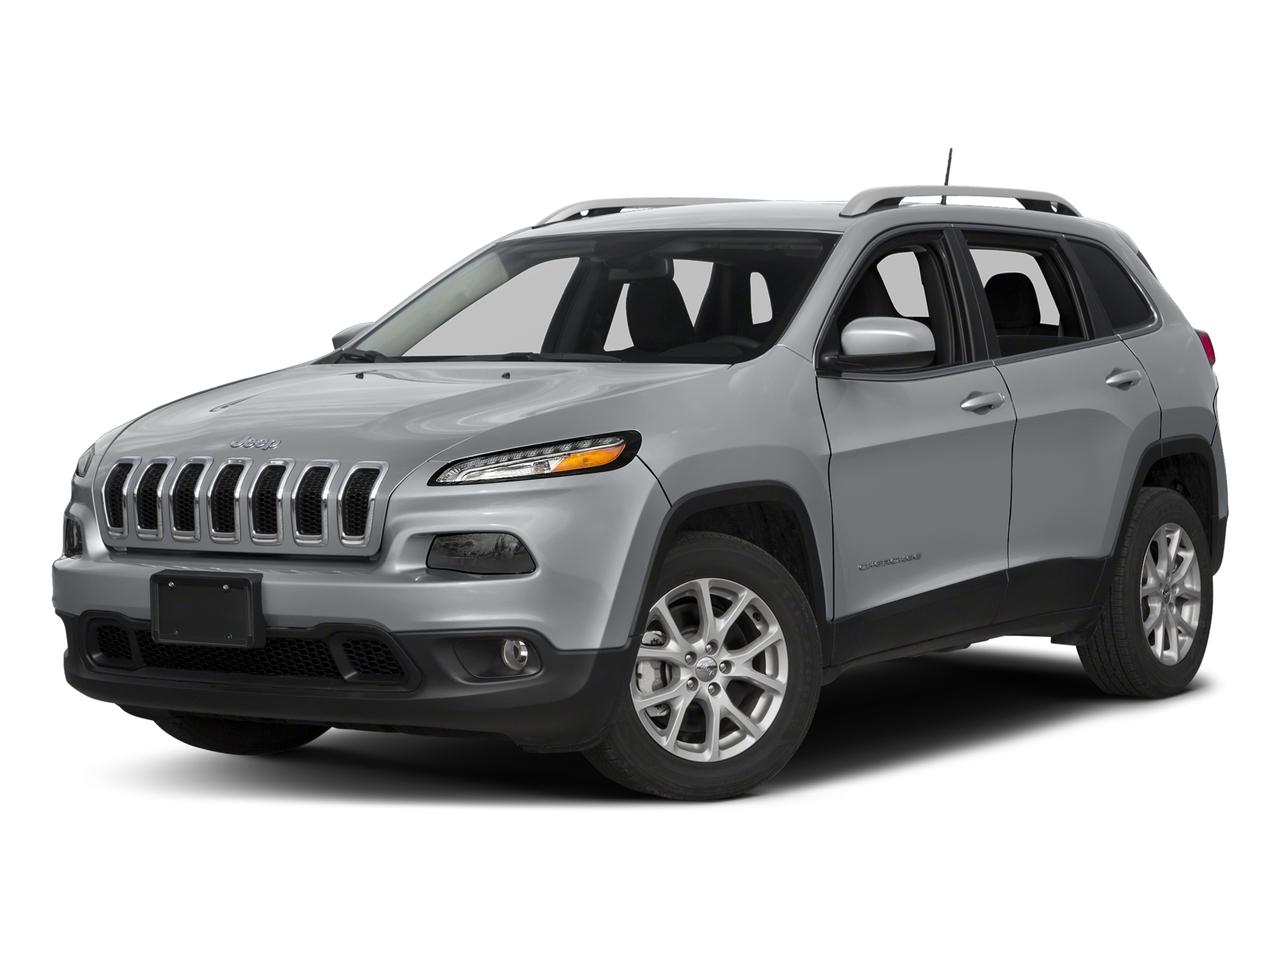 2018 Jeep Cherokee Vehicle Photo in Plainfield, IL 60586